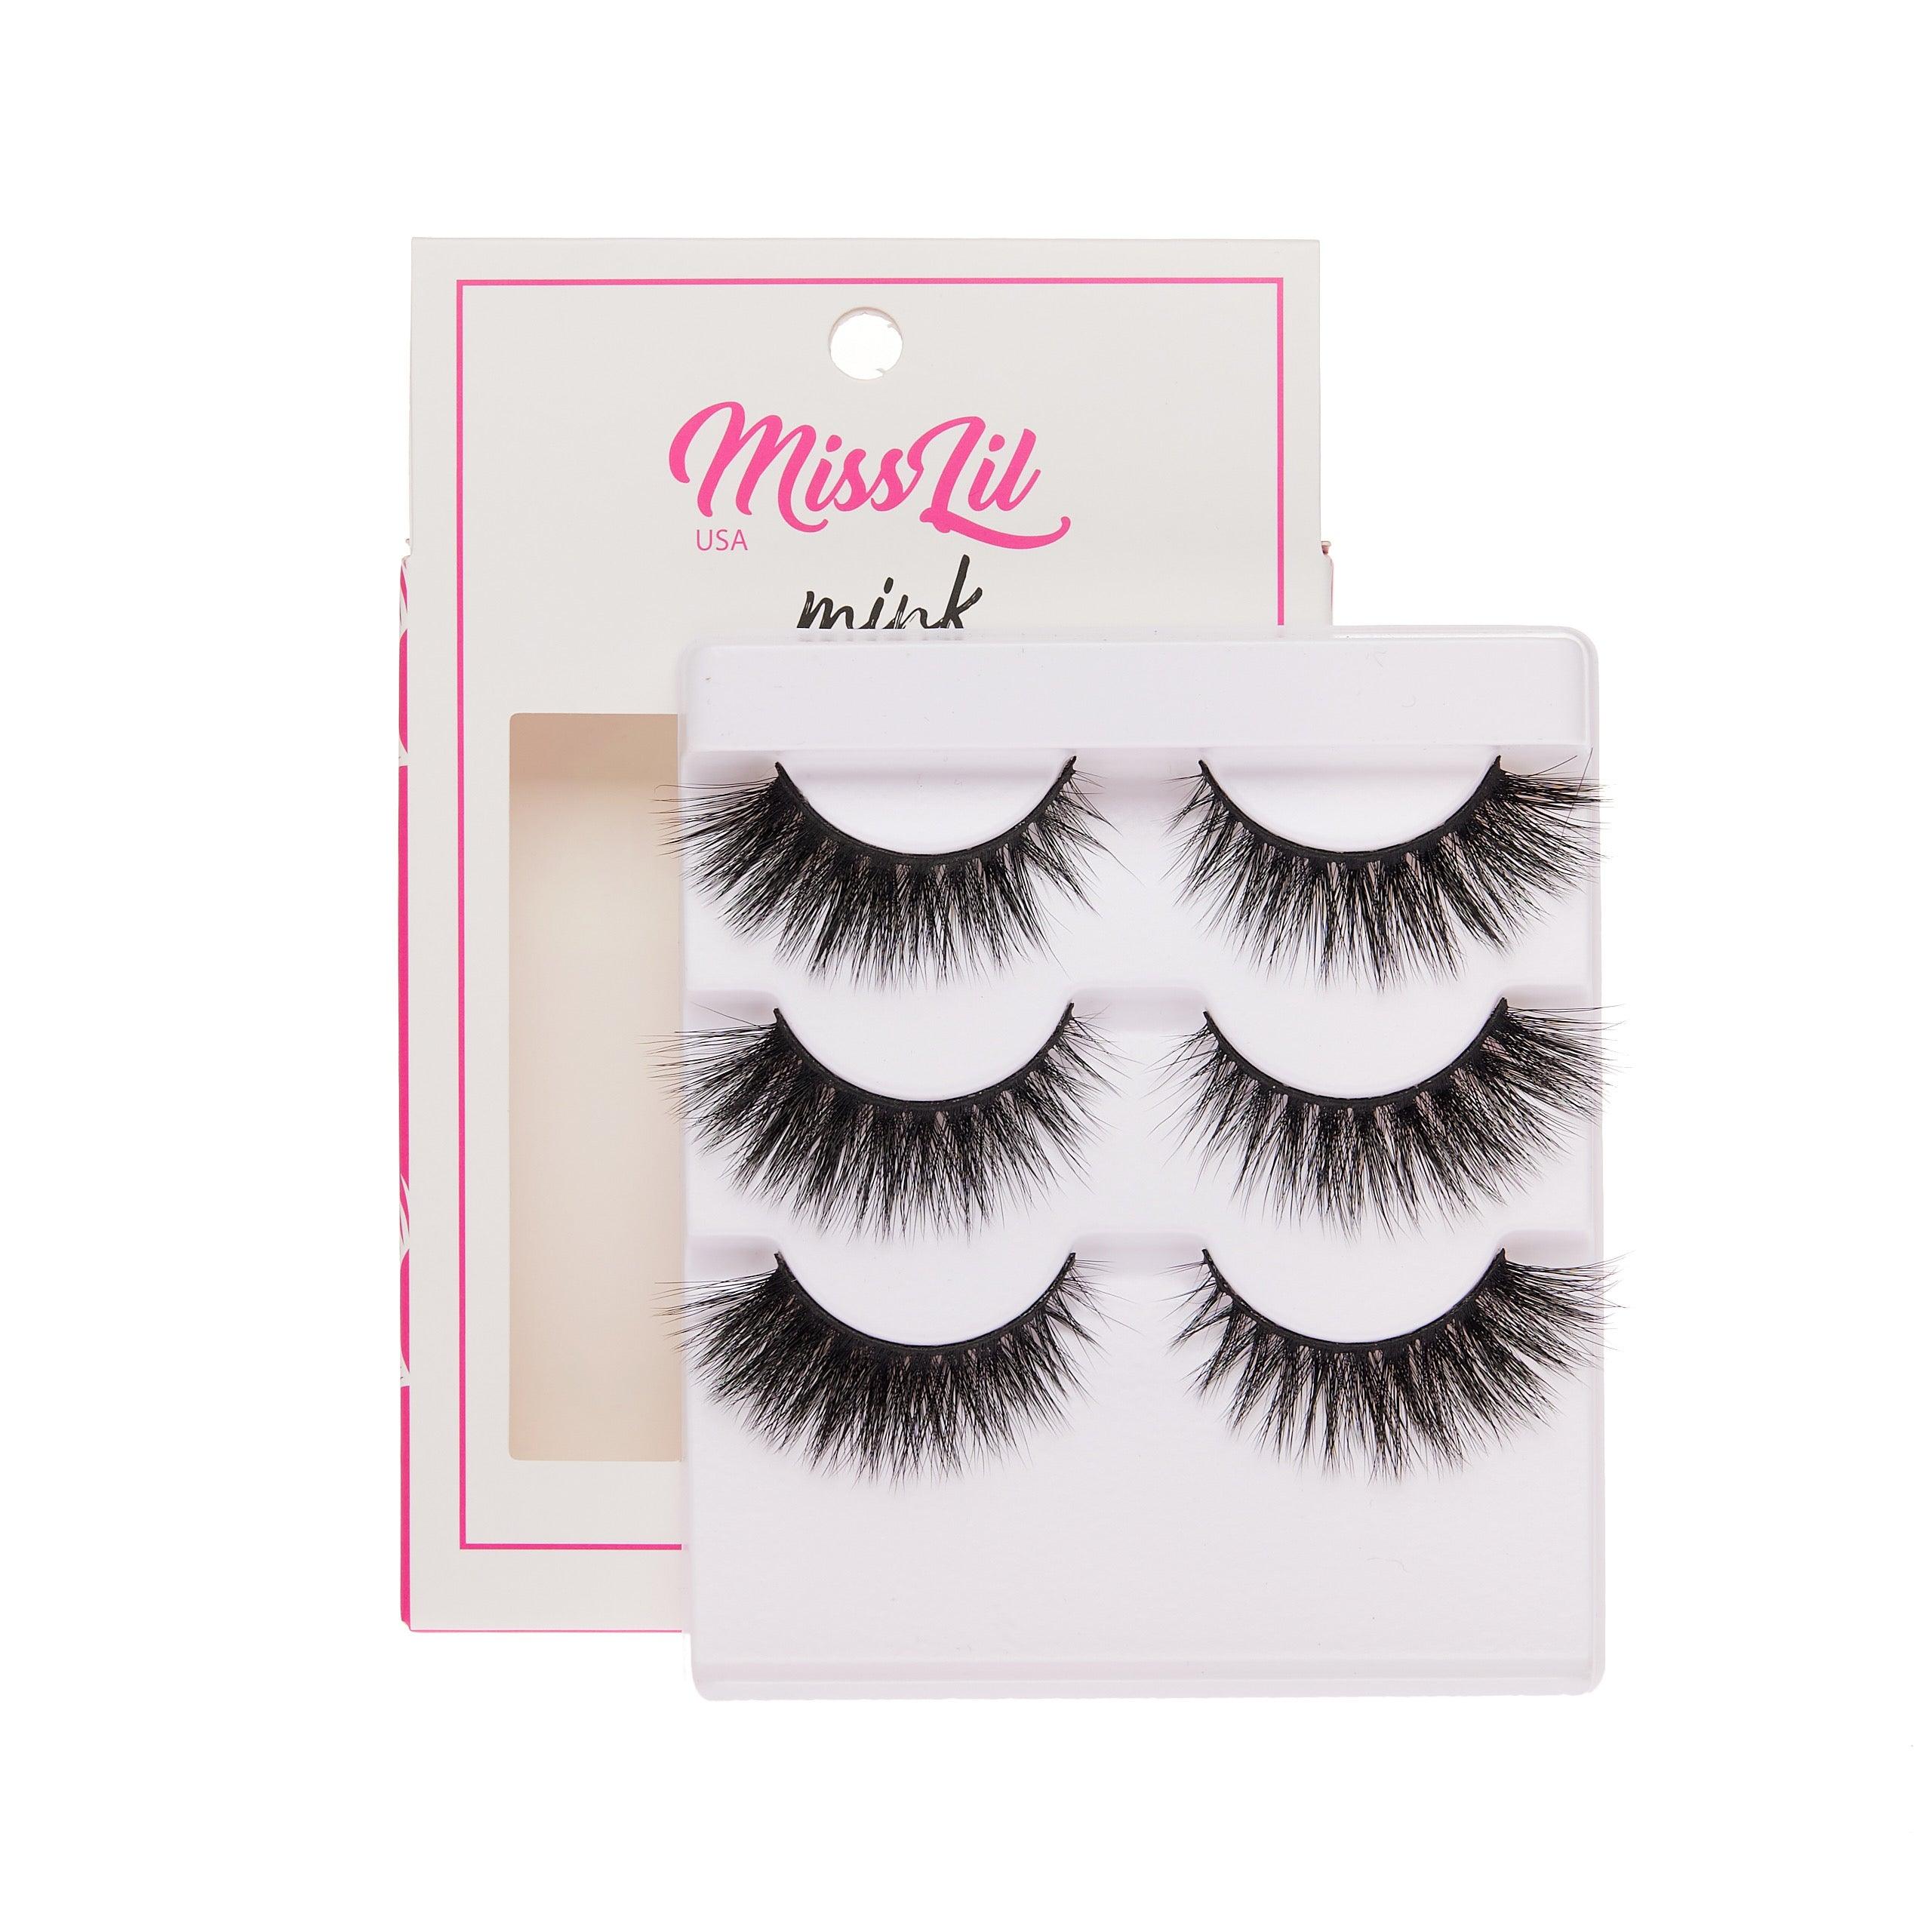 3-Pair Faux Mink Effect Eyelashes - Lash Party Collection #8 - Pack of 3 - Miss Lil USA